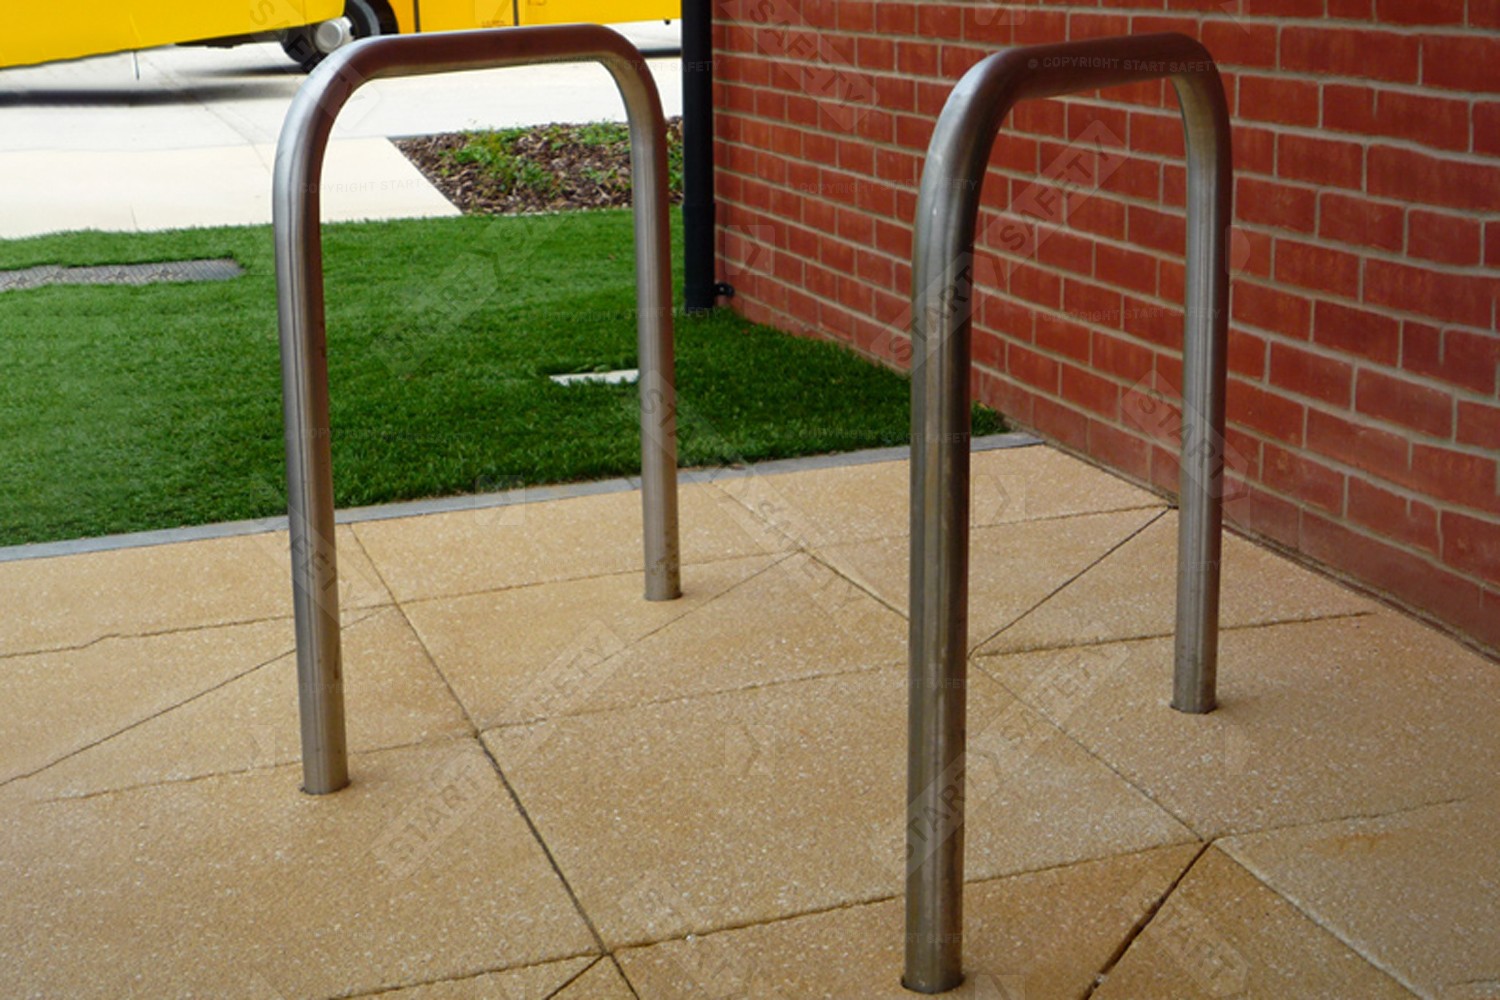 Premium stainless steel Sheffield cycle stand installed into paving